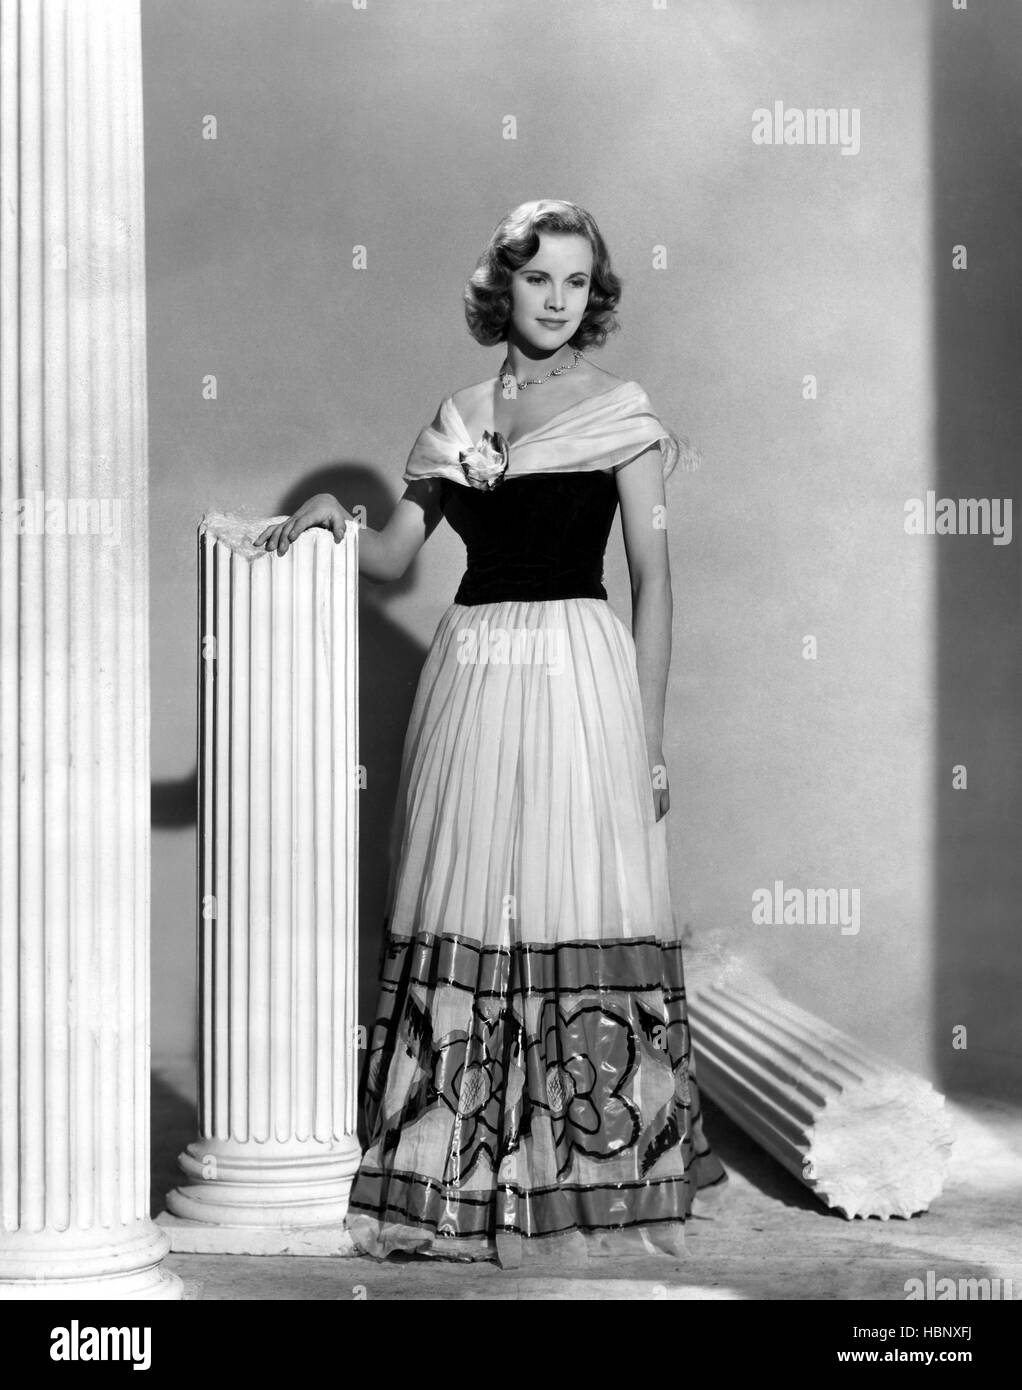 FAME IS THE SPUR, Honor Blackman, 1946 Stock Photo